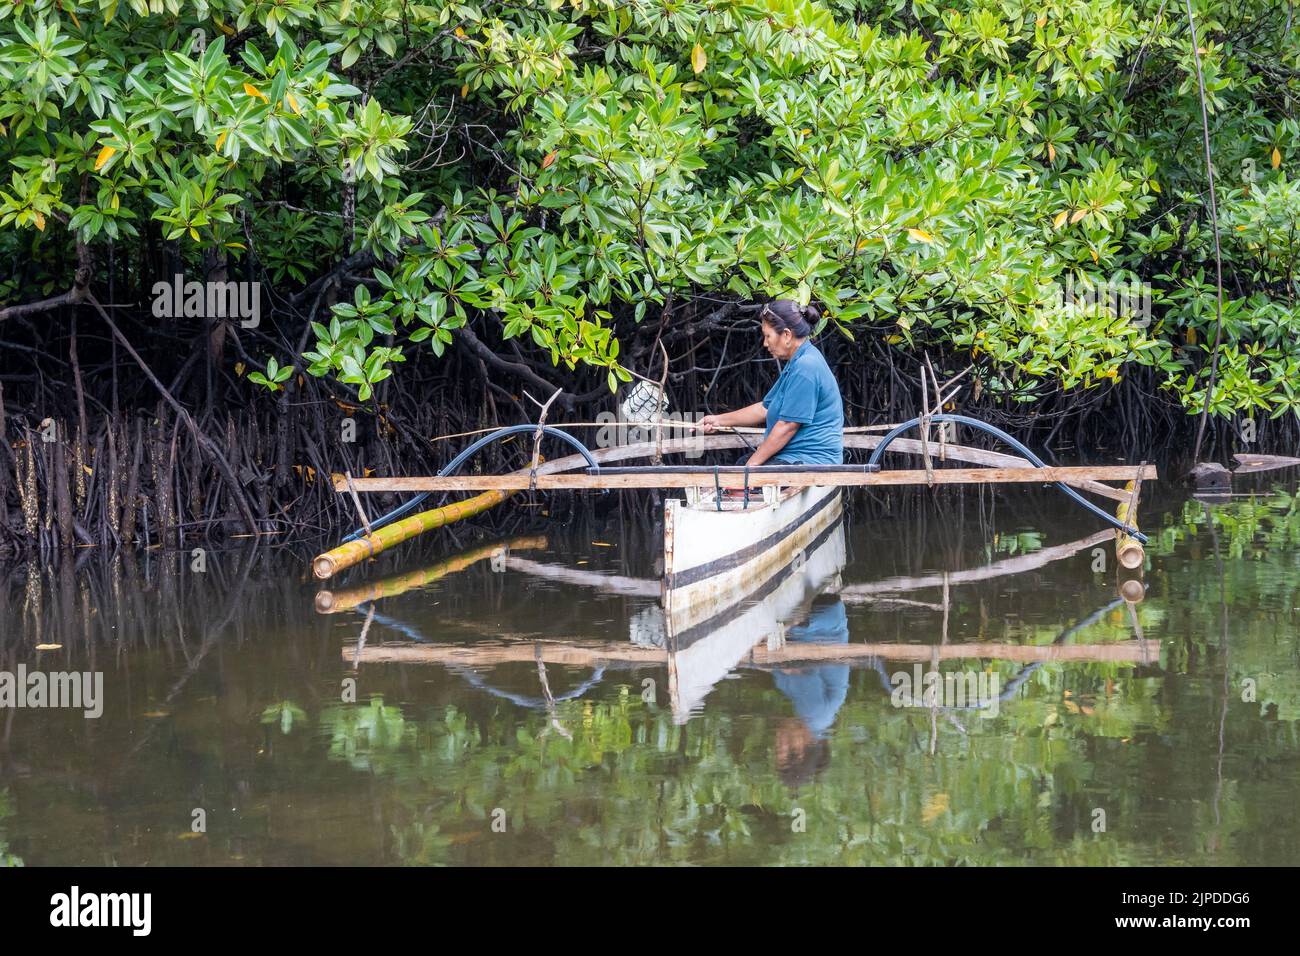 An Indonesia woman fishing from an outrigger canoe in mangrove forest. Sulawesi, Indonesia. Stock Photo